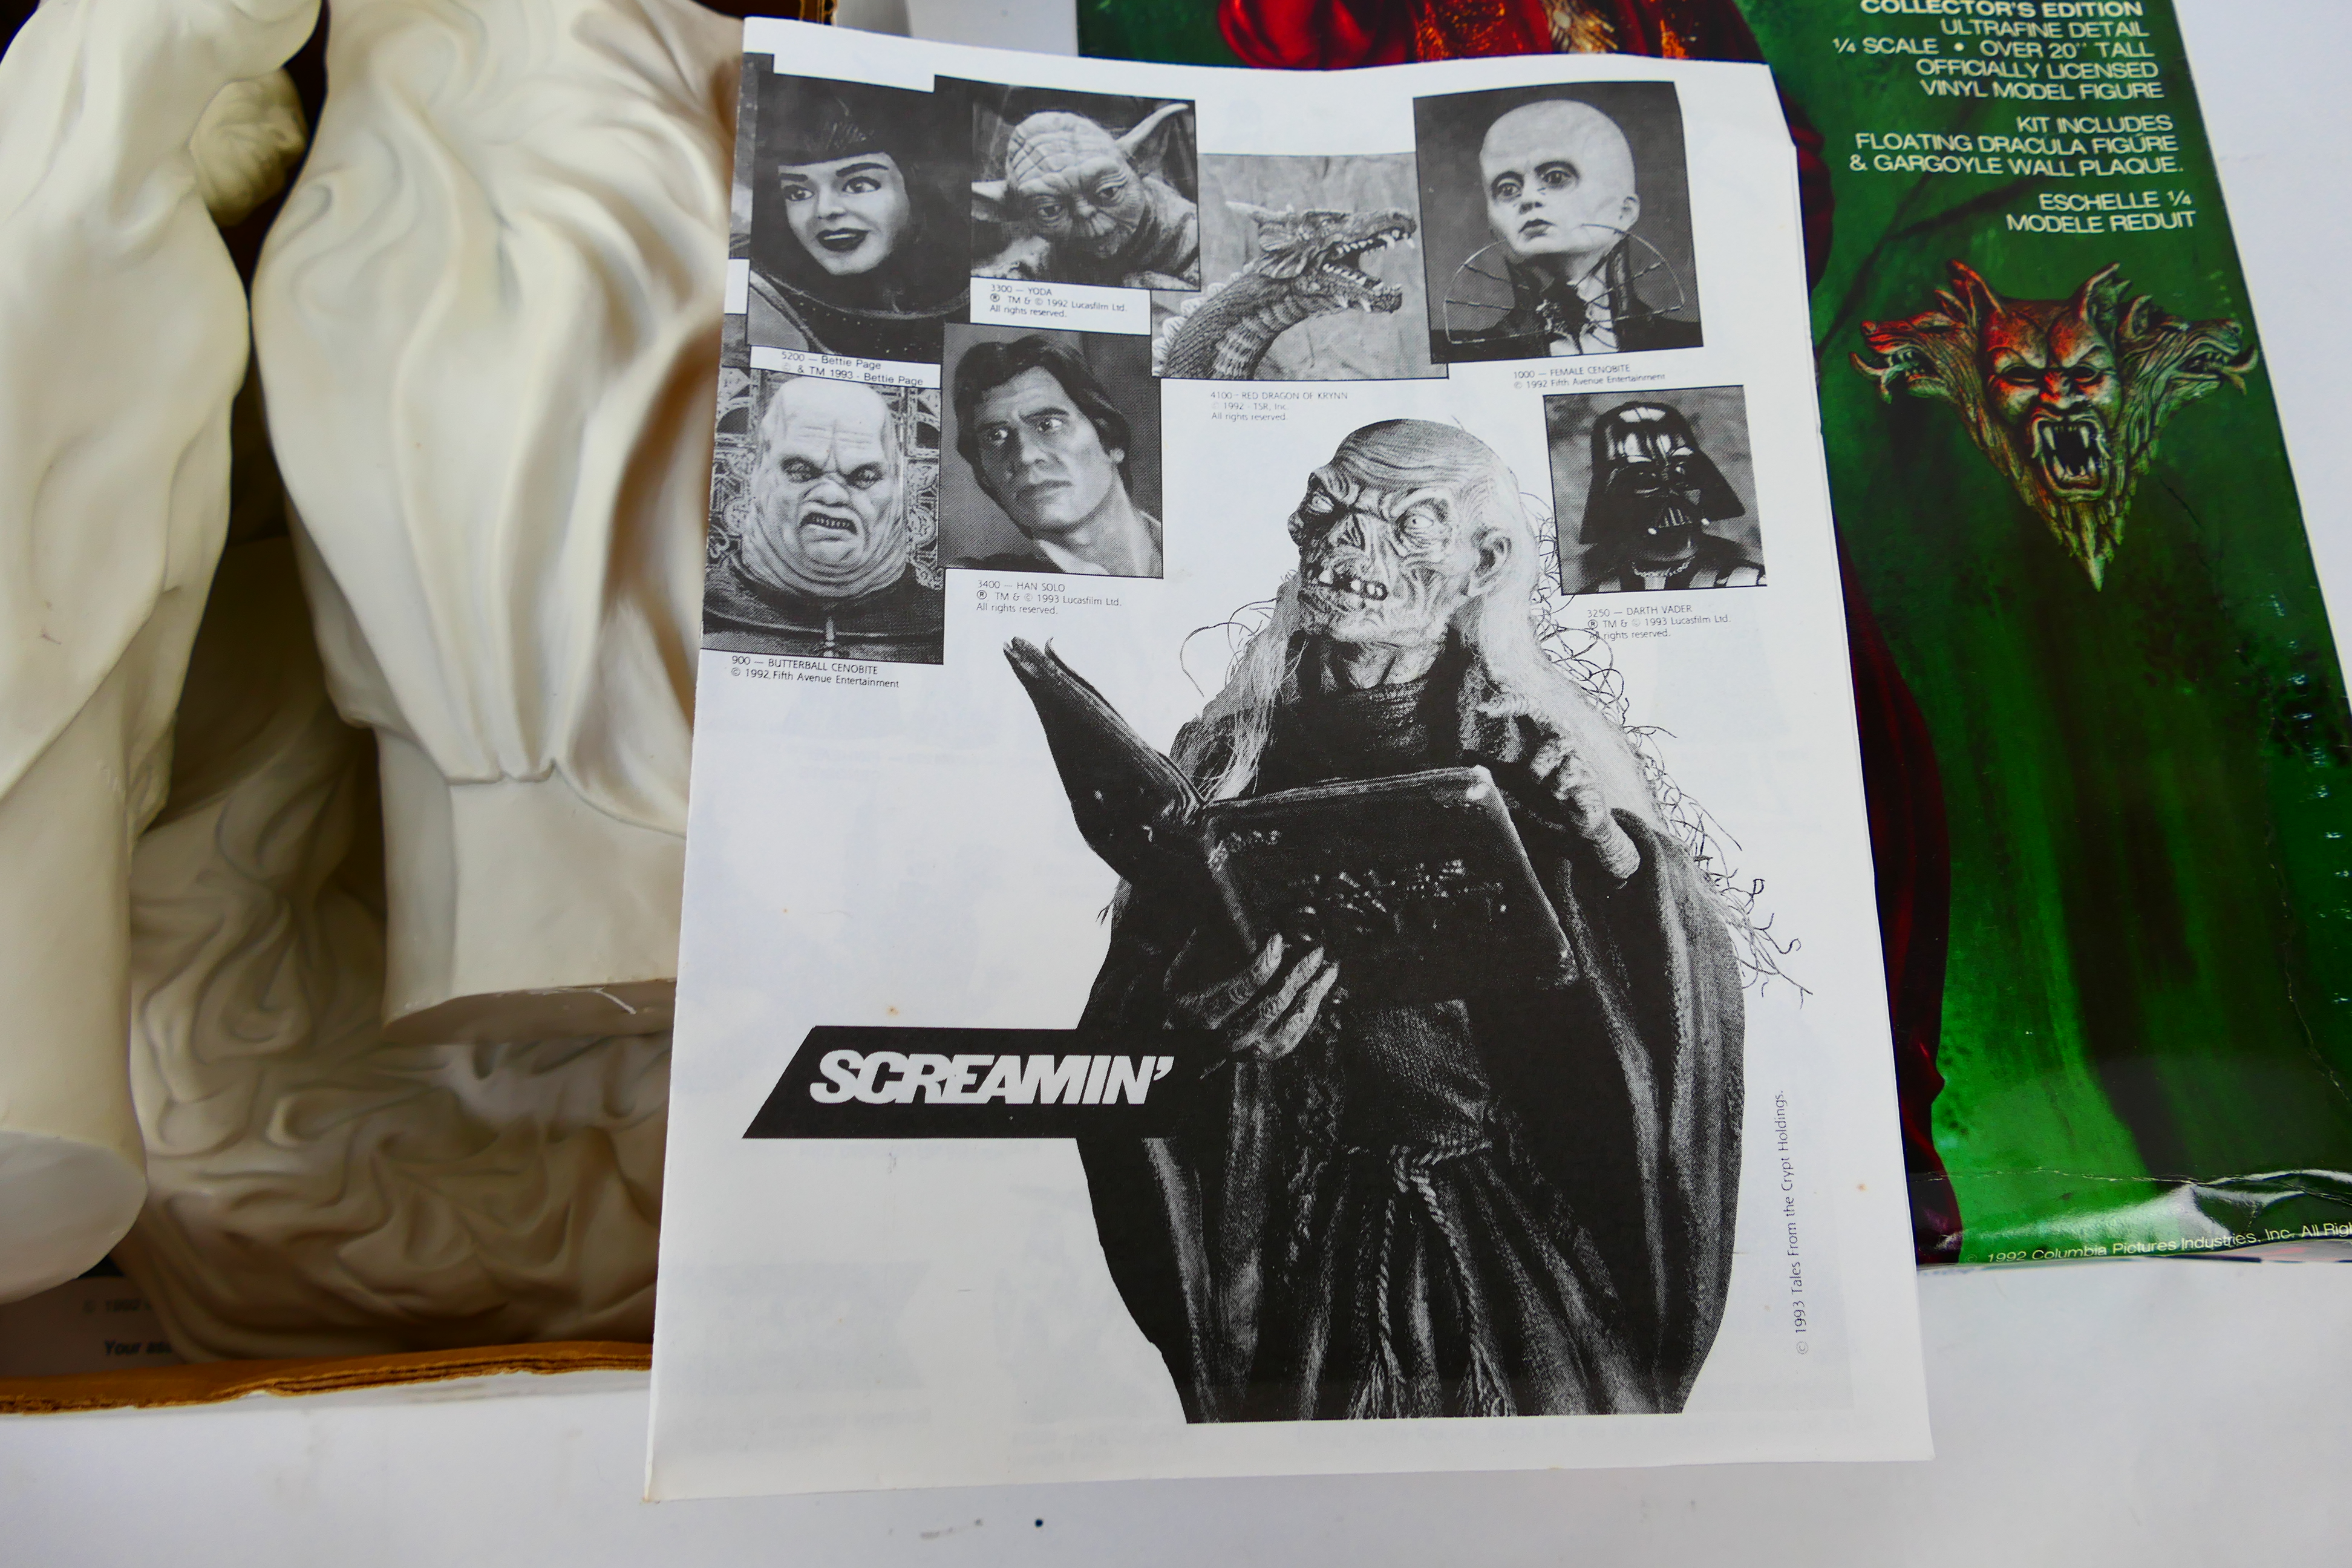 Screamin - A boxed Collectors Edition 1/4 scale vinyl Bram Stoker's 'Dracula' model kit. - Image 3 of 4